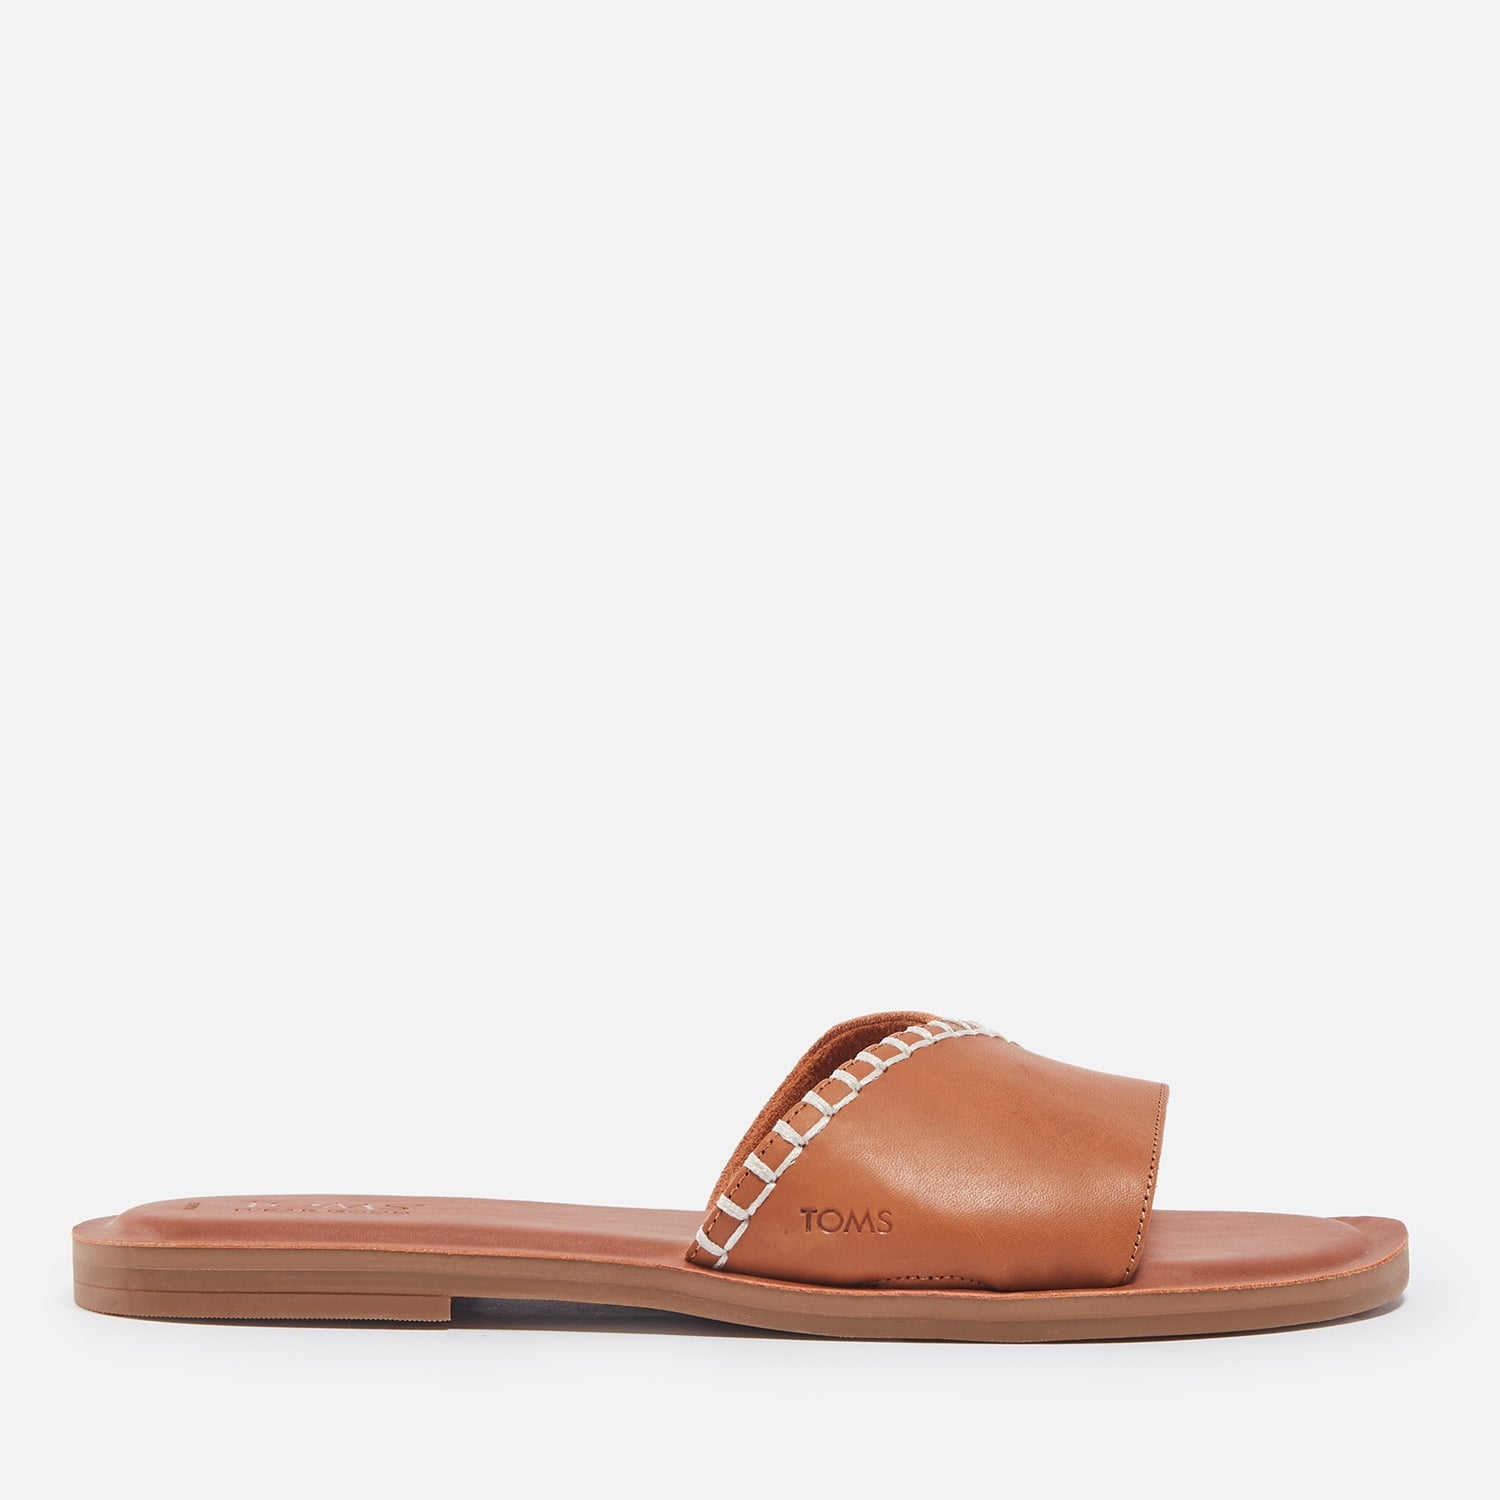 TOMS Women's Shea Leather and Suede Sandals - UK 5